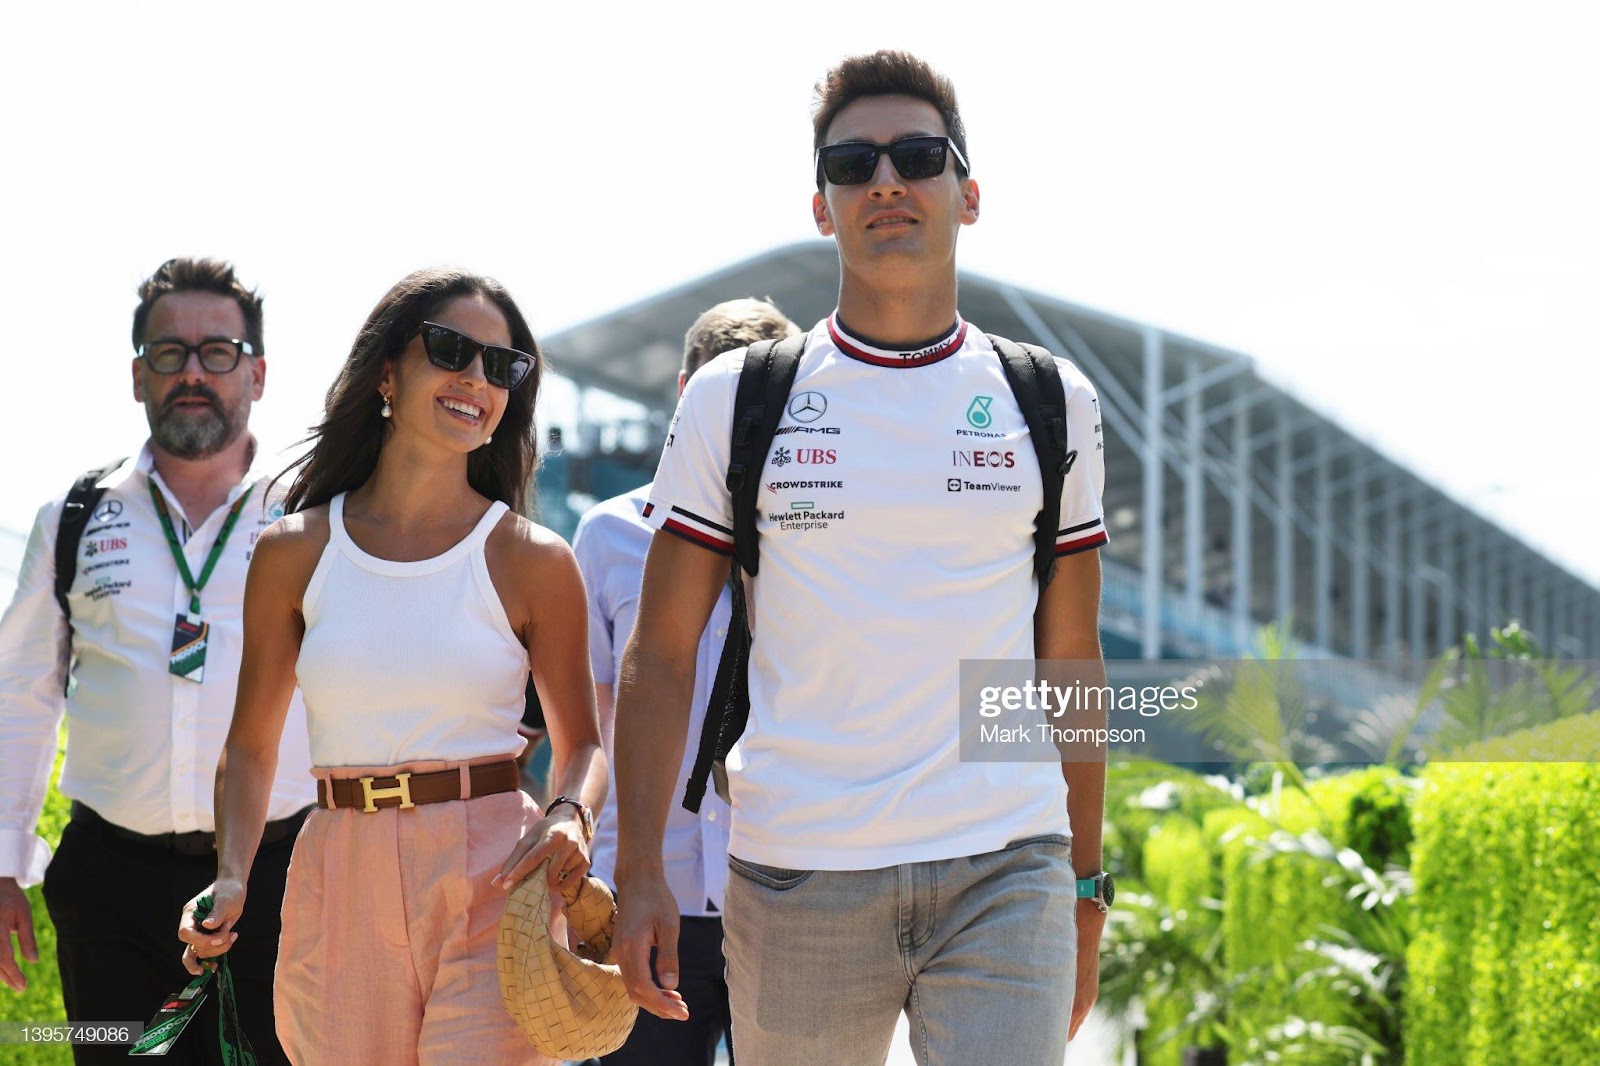 D:\Documenti\posts\posts\Miami\New folder\donne\donne piloti\george-russell-of-great-britain-and-mercedes-walks-in-the-paddock-picture-id1395749086.jpg